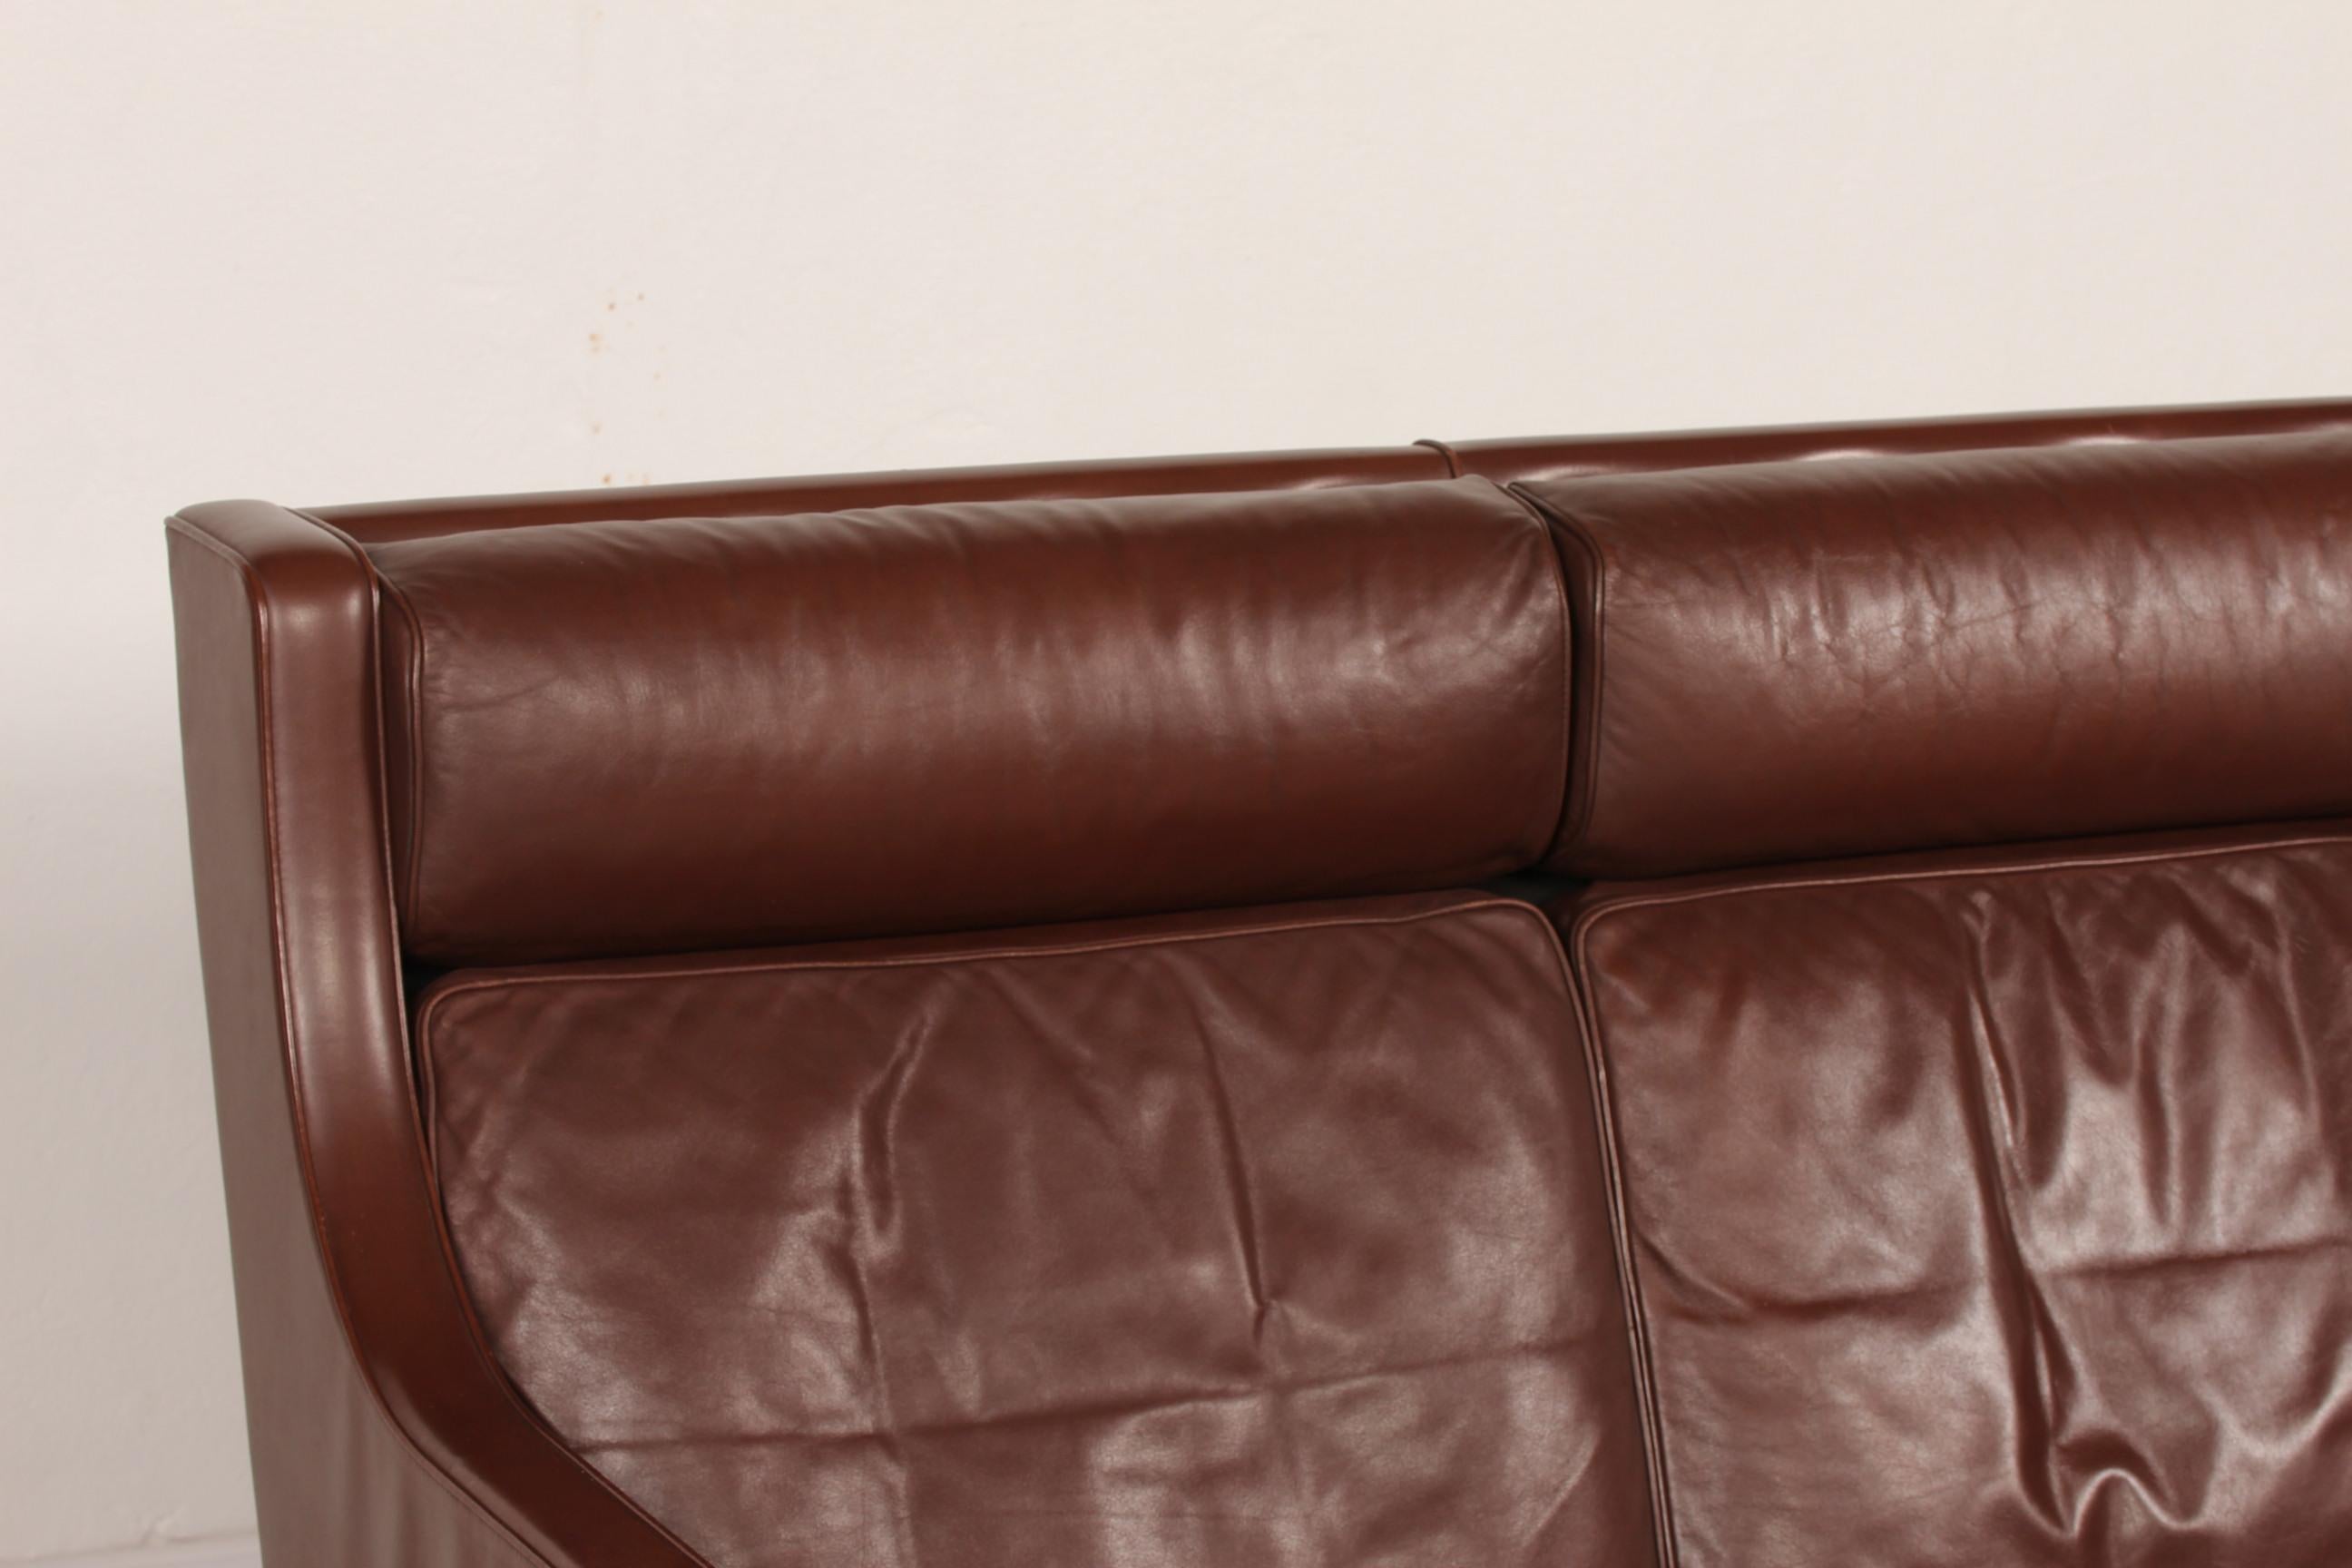 Danish vintage Børge Mogensen (1914-1972) sofa for 2 persons model no. 2432 with high back.
It's upholstered with the original chocolate brown leather. The legs are made of solid oak. 
The cushions are filled inside with granules and natural